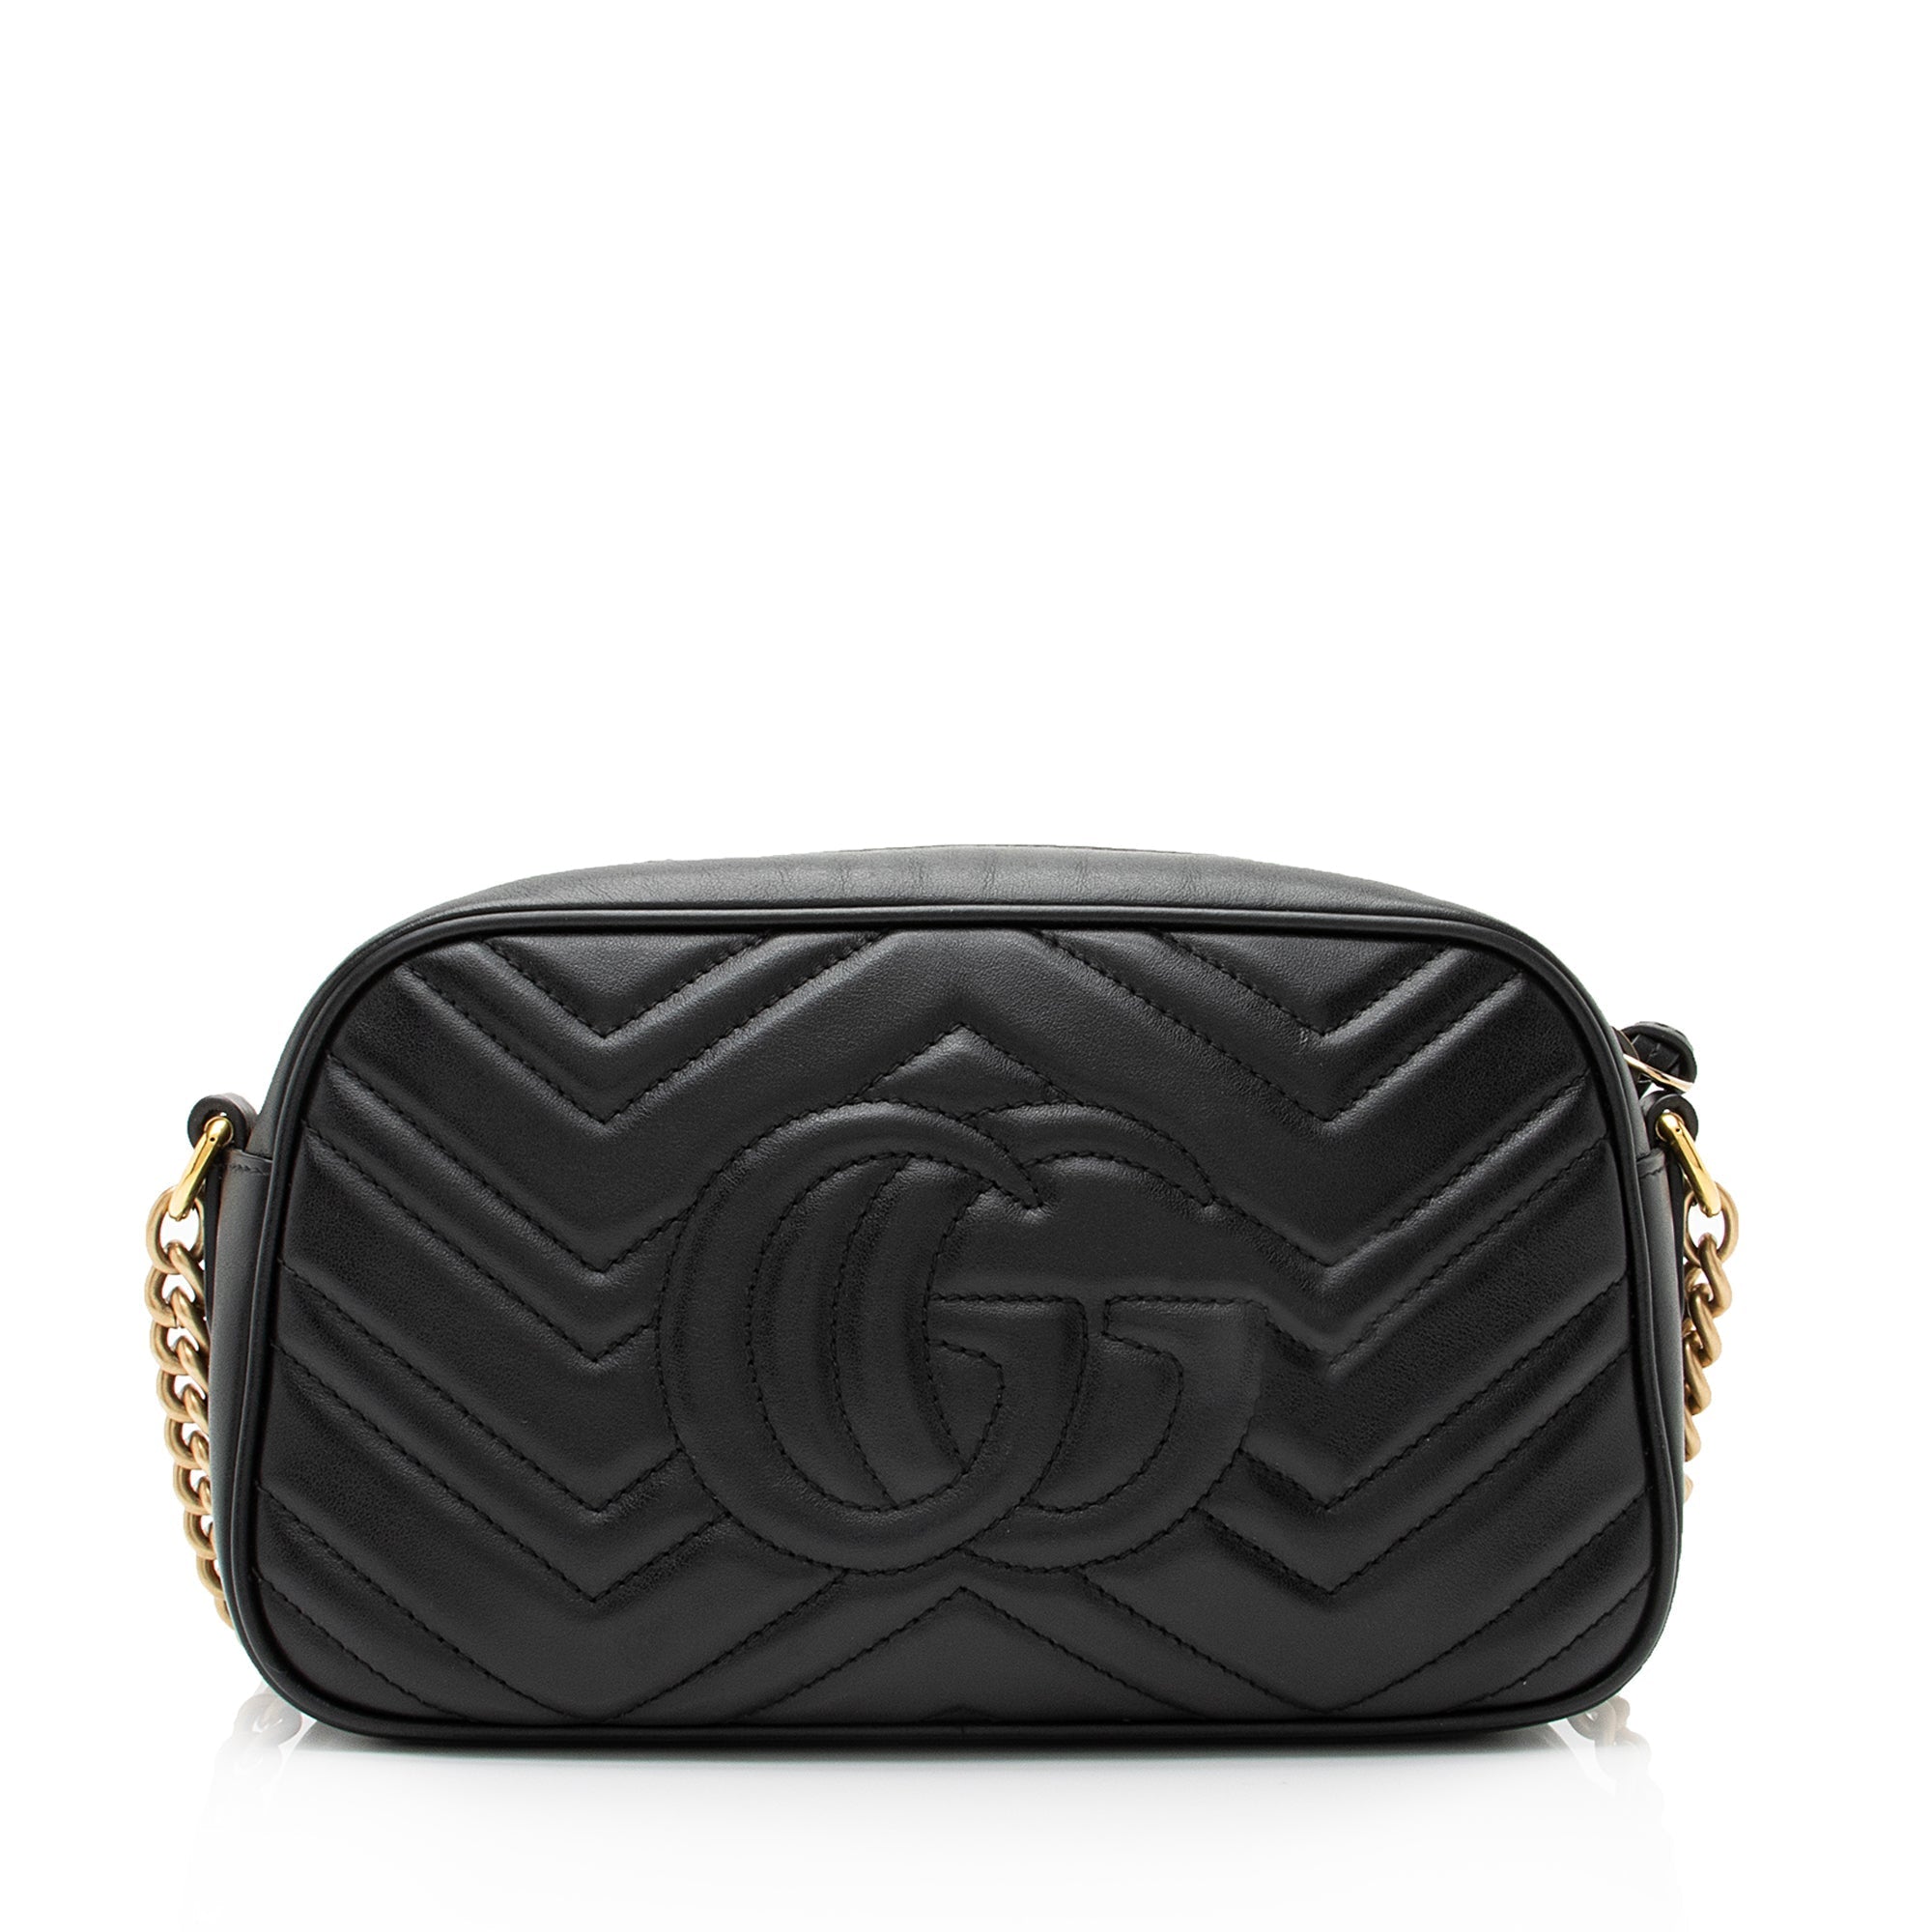 Gucci Matelasse Leather GG Marmont Small Shoulder Bag